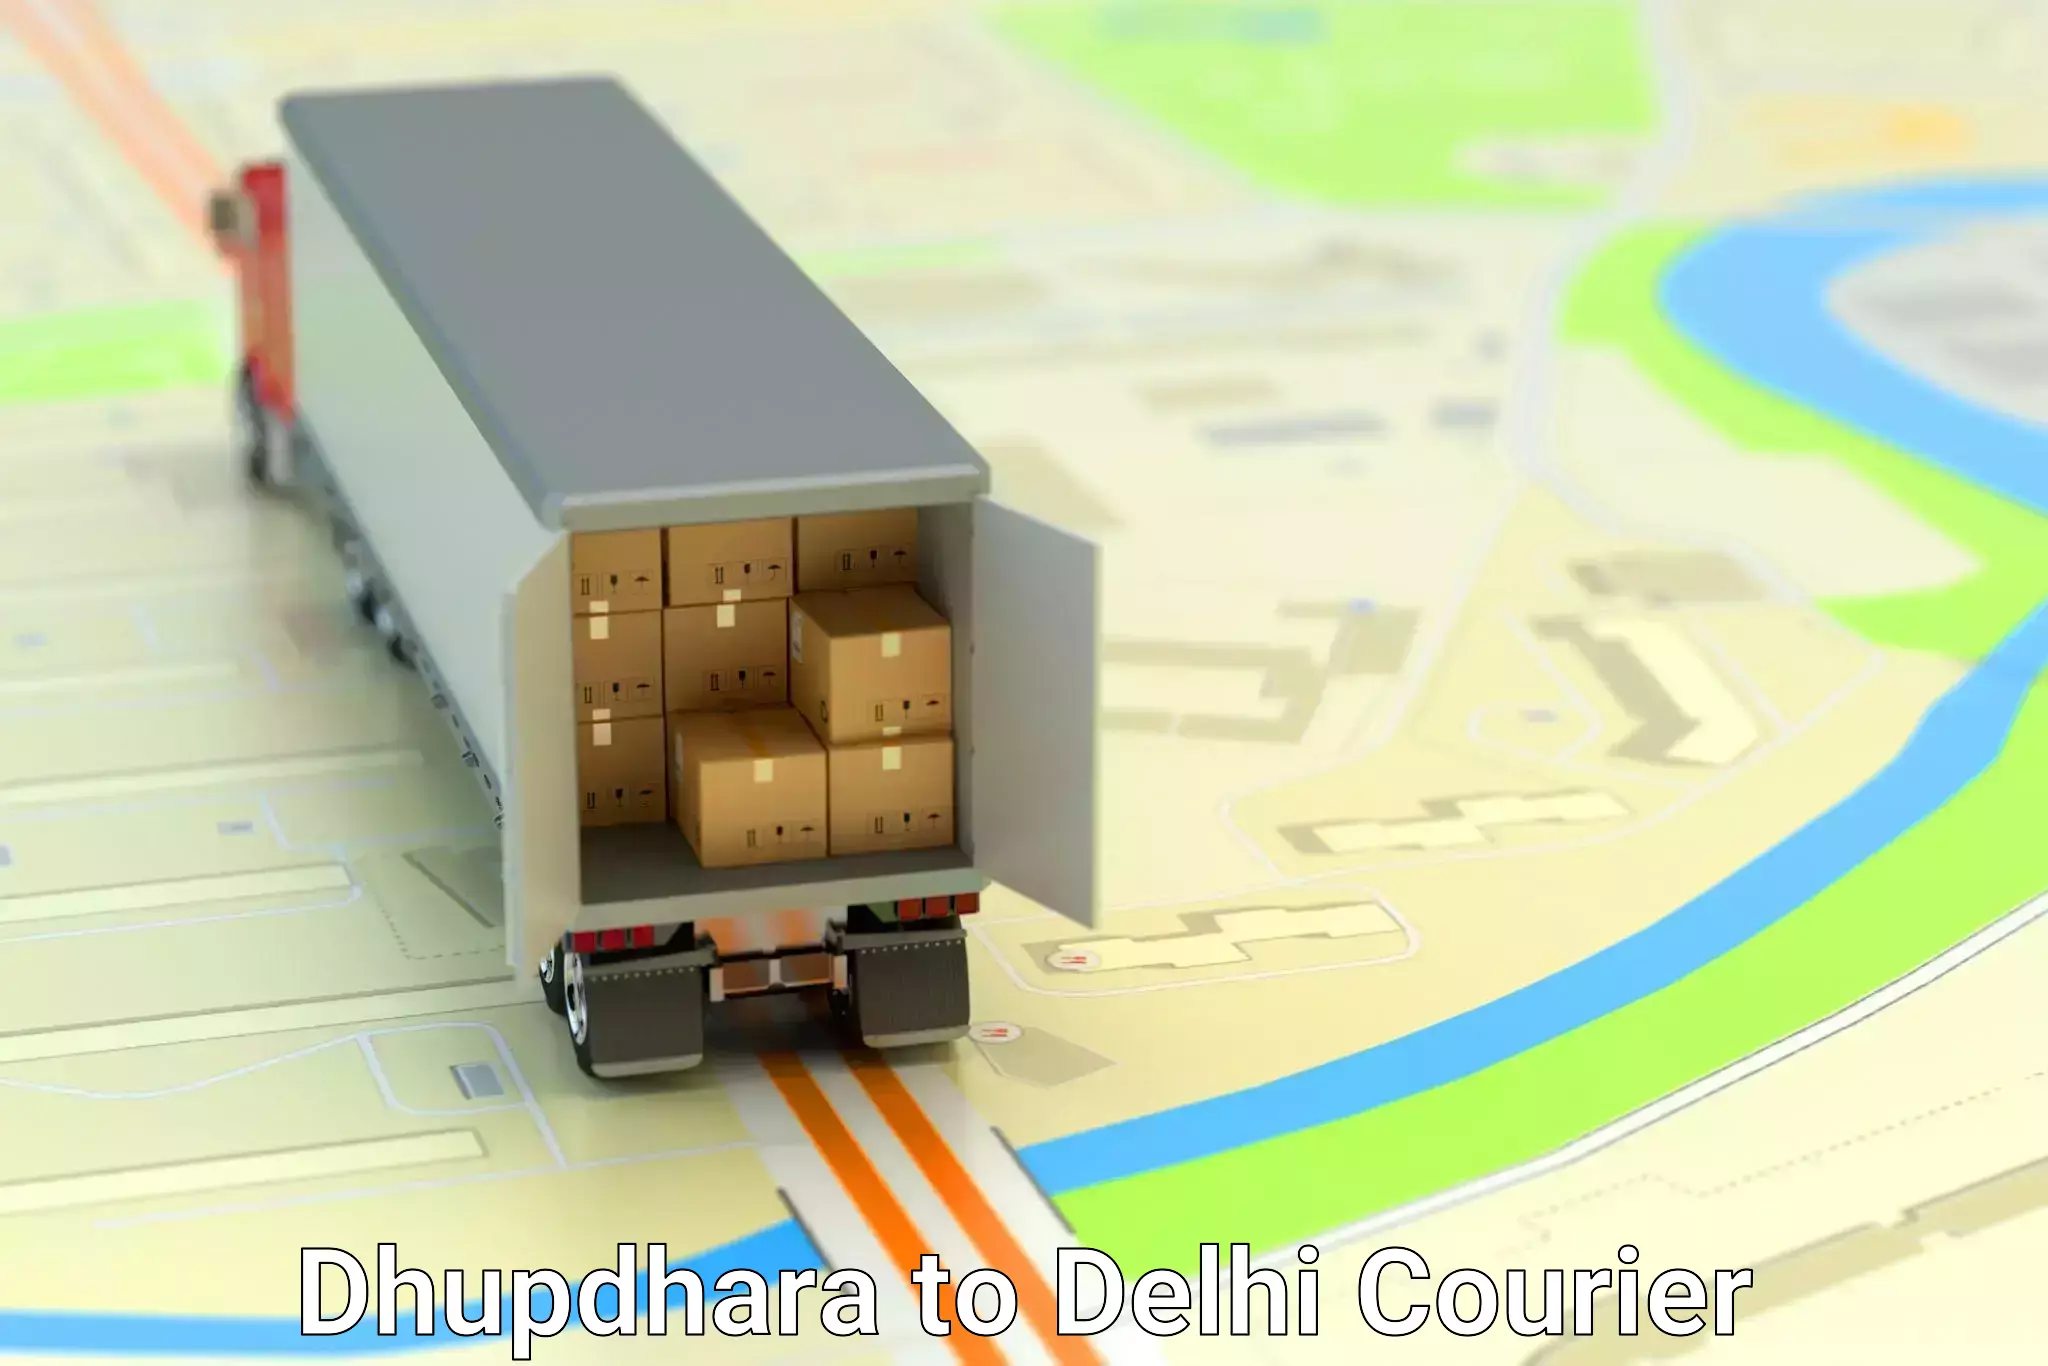 Express delivery capabilities Dhupdhara to University of Delhi